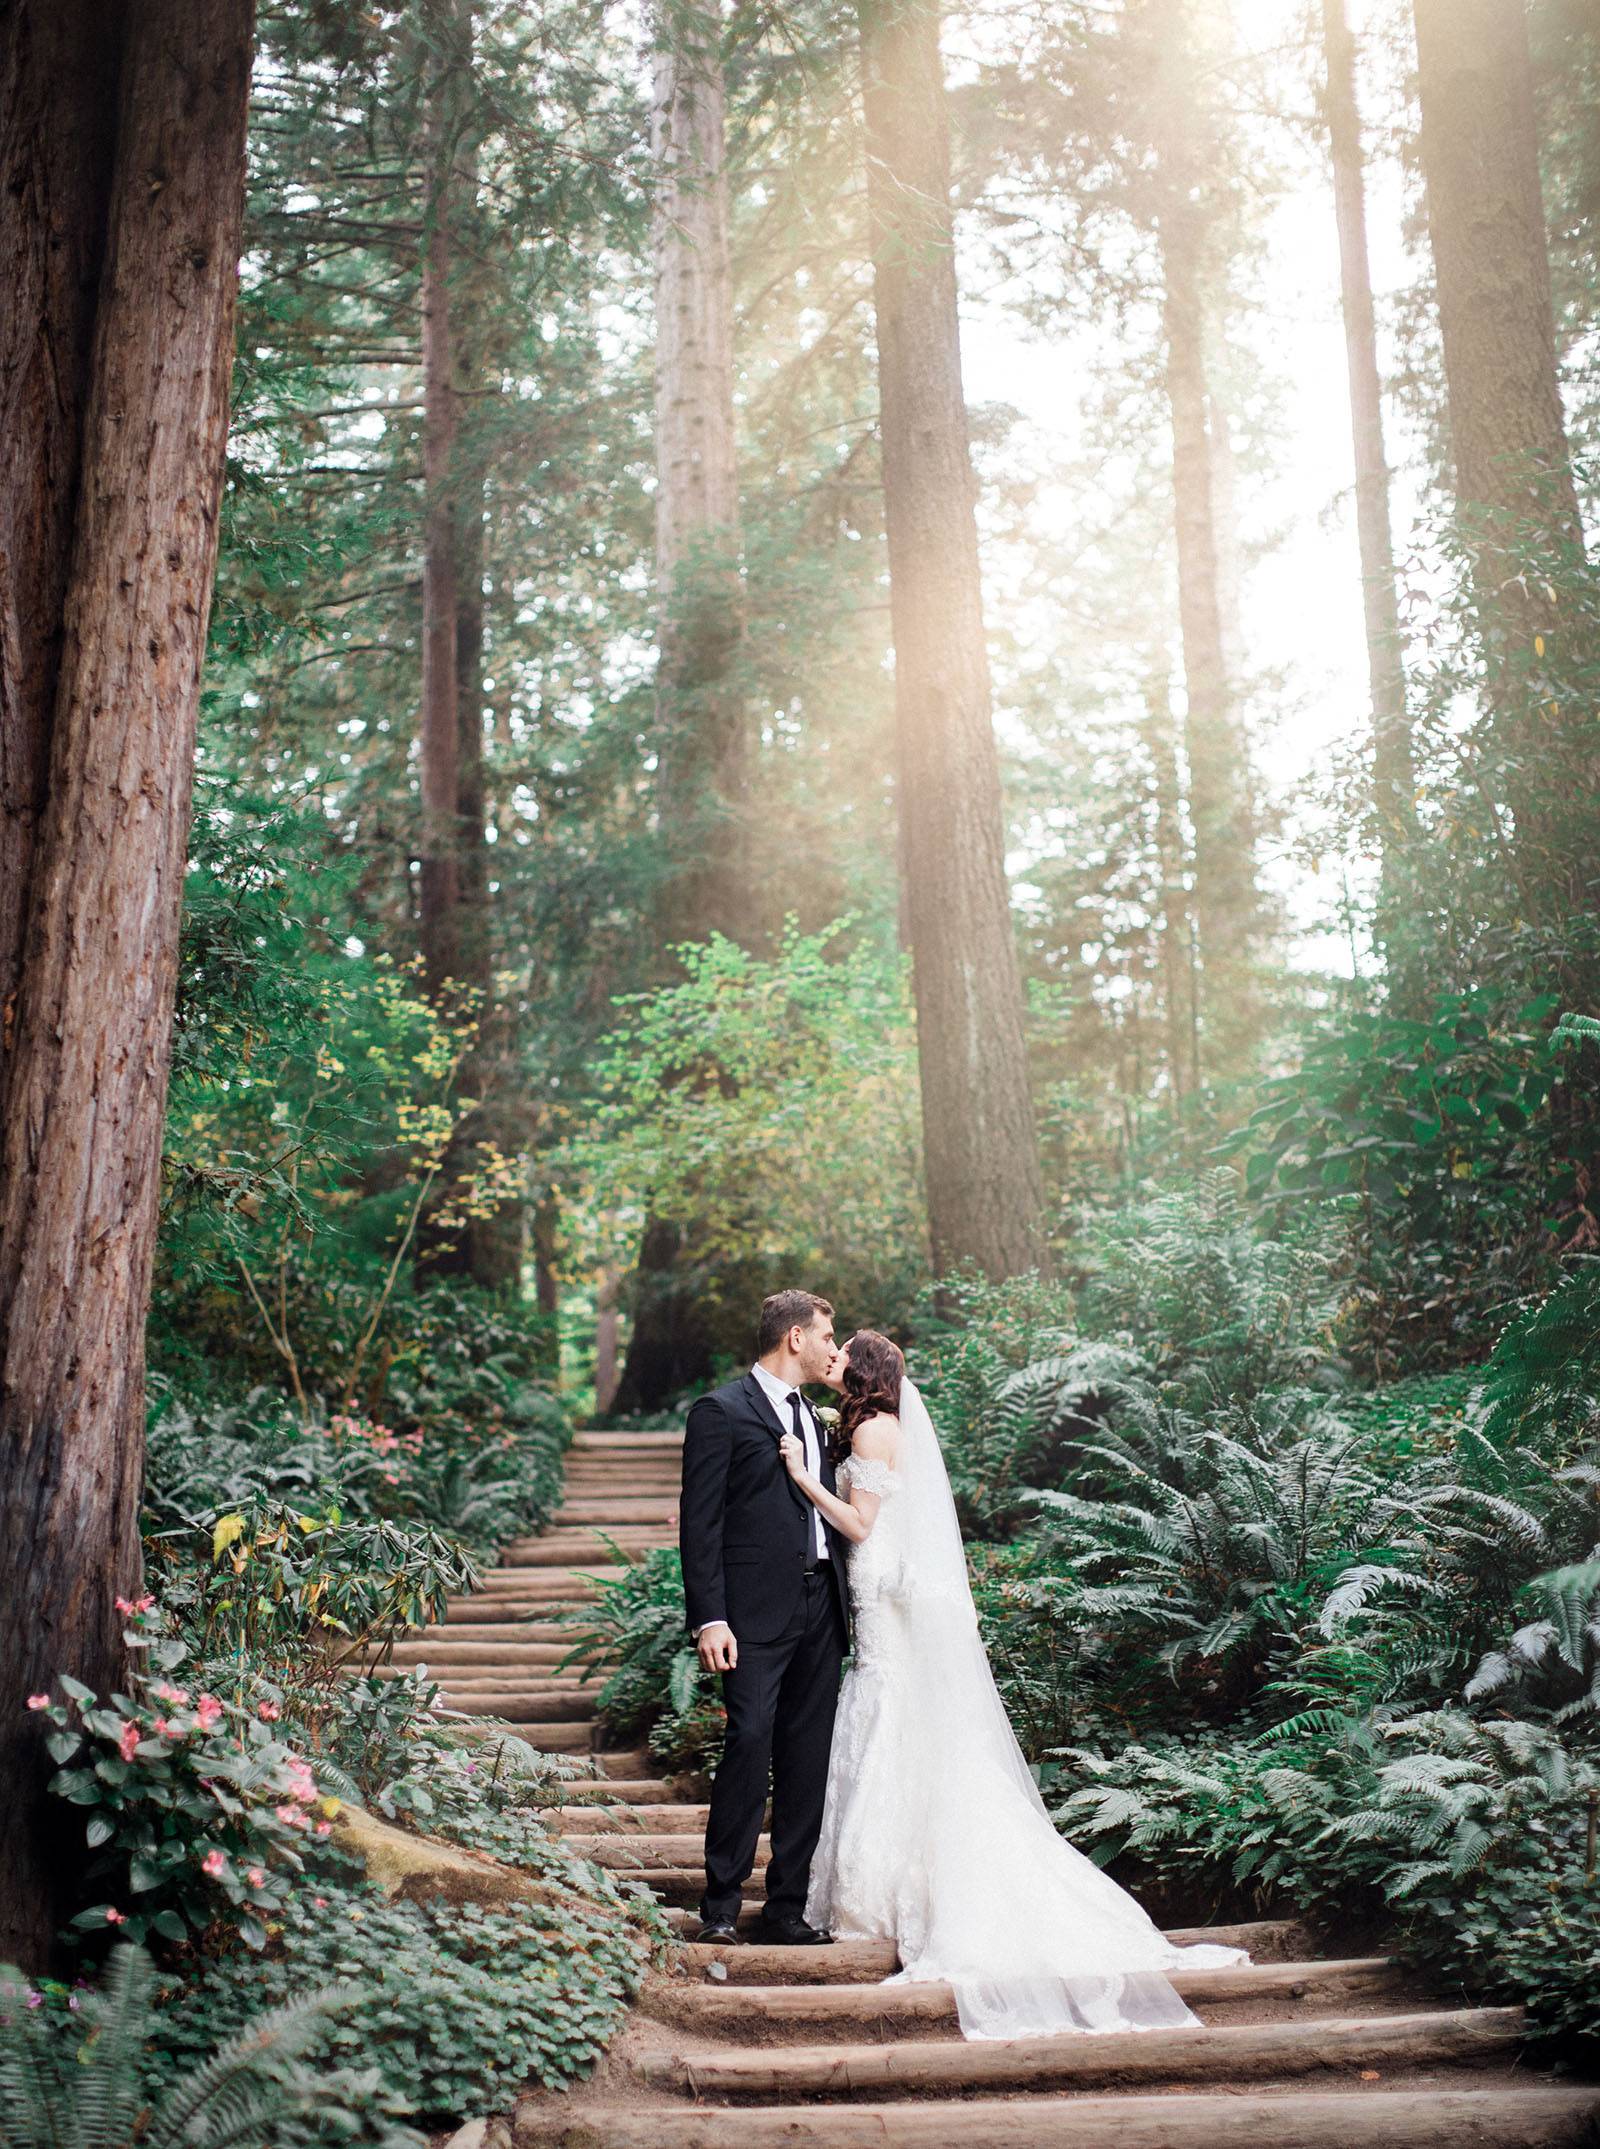 Timeless & Elegant wedding in the lush California Redwood Forests ...